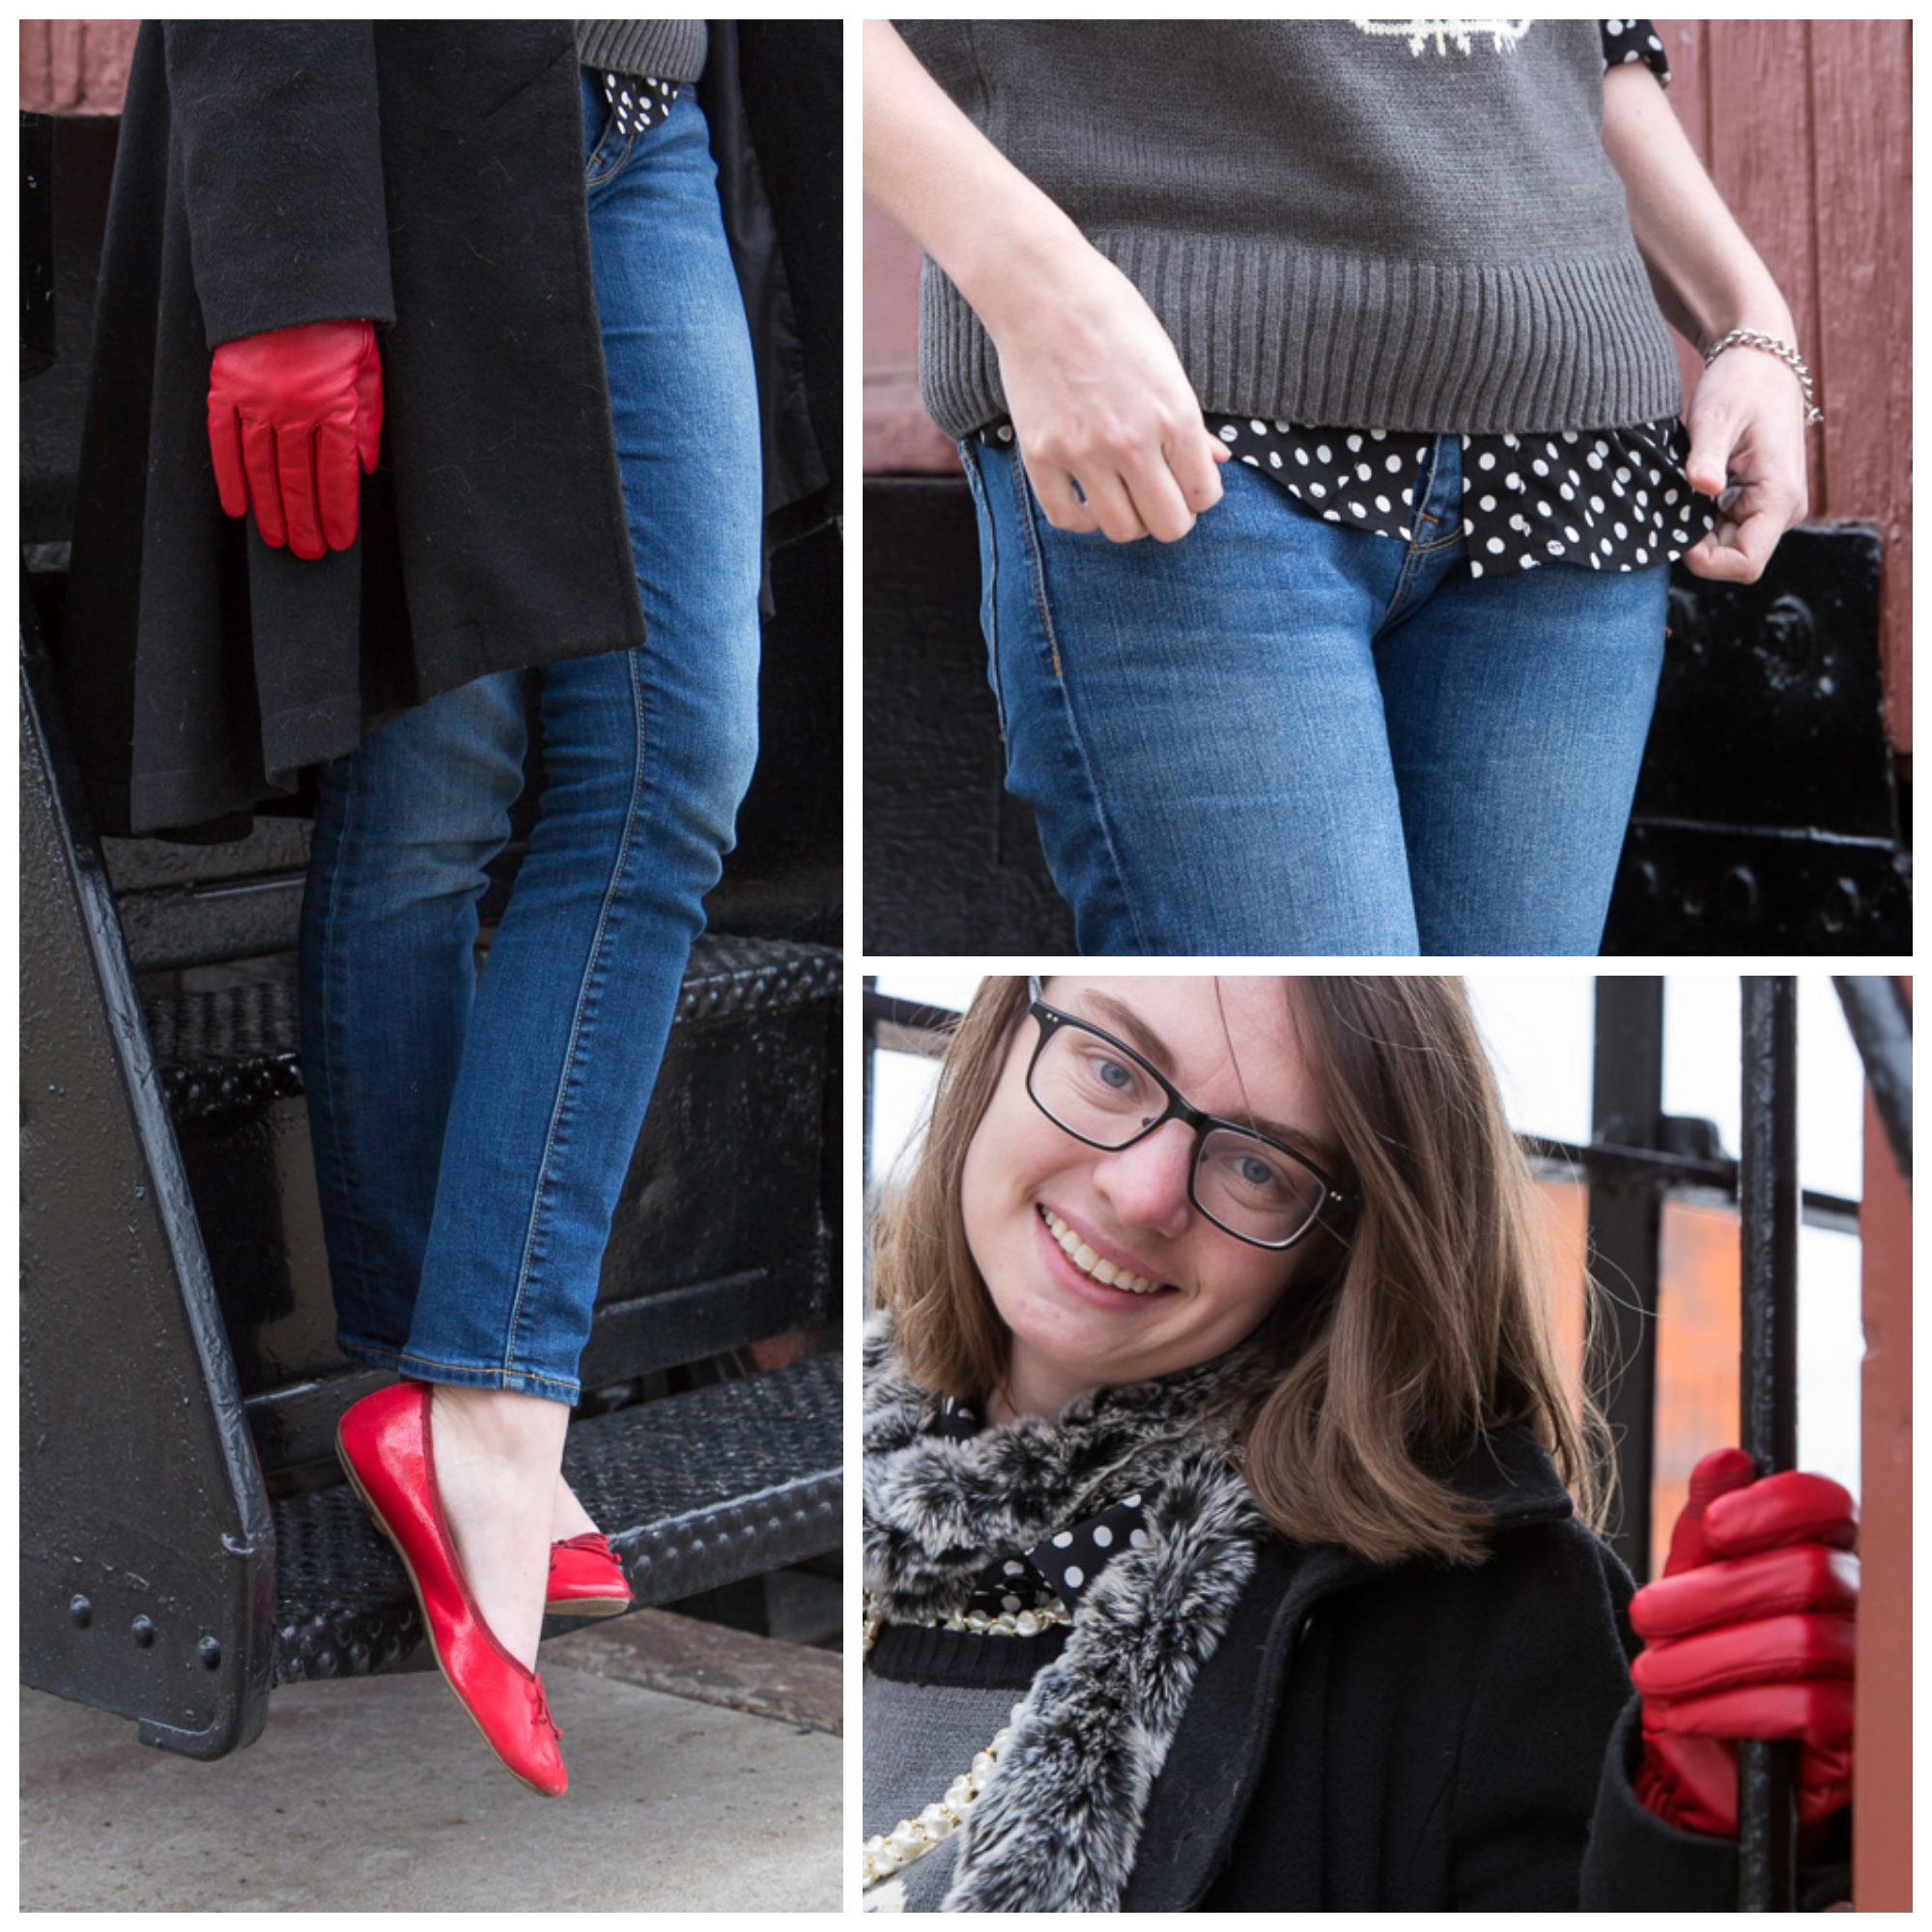 red gloves, owl sweater, polka dots, popbasic, red shoes, fur scarf, outfit, never fully dressed, withoutastyle, montana,